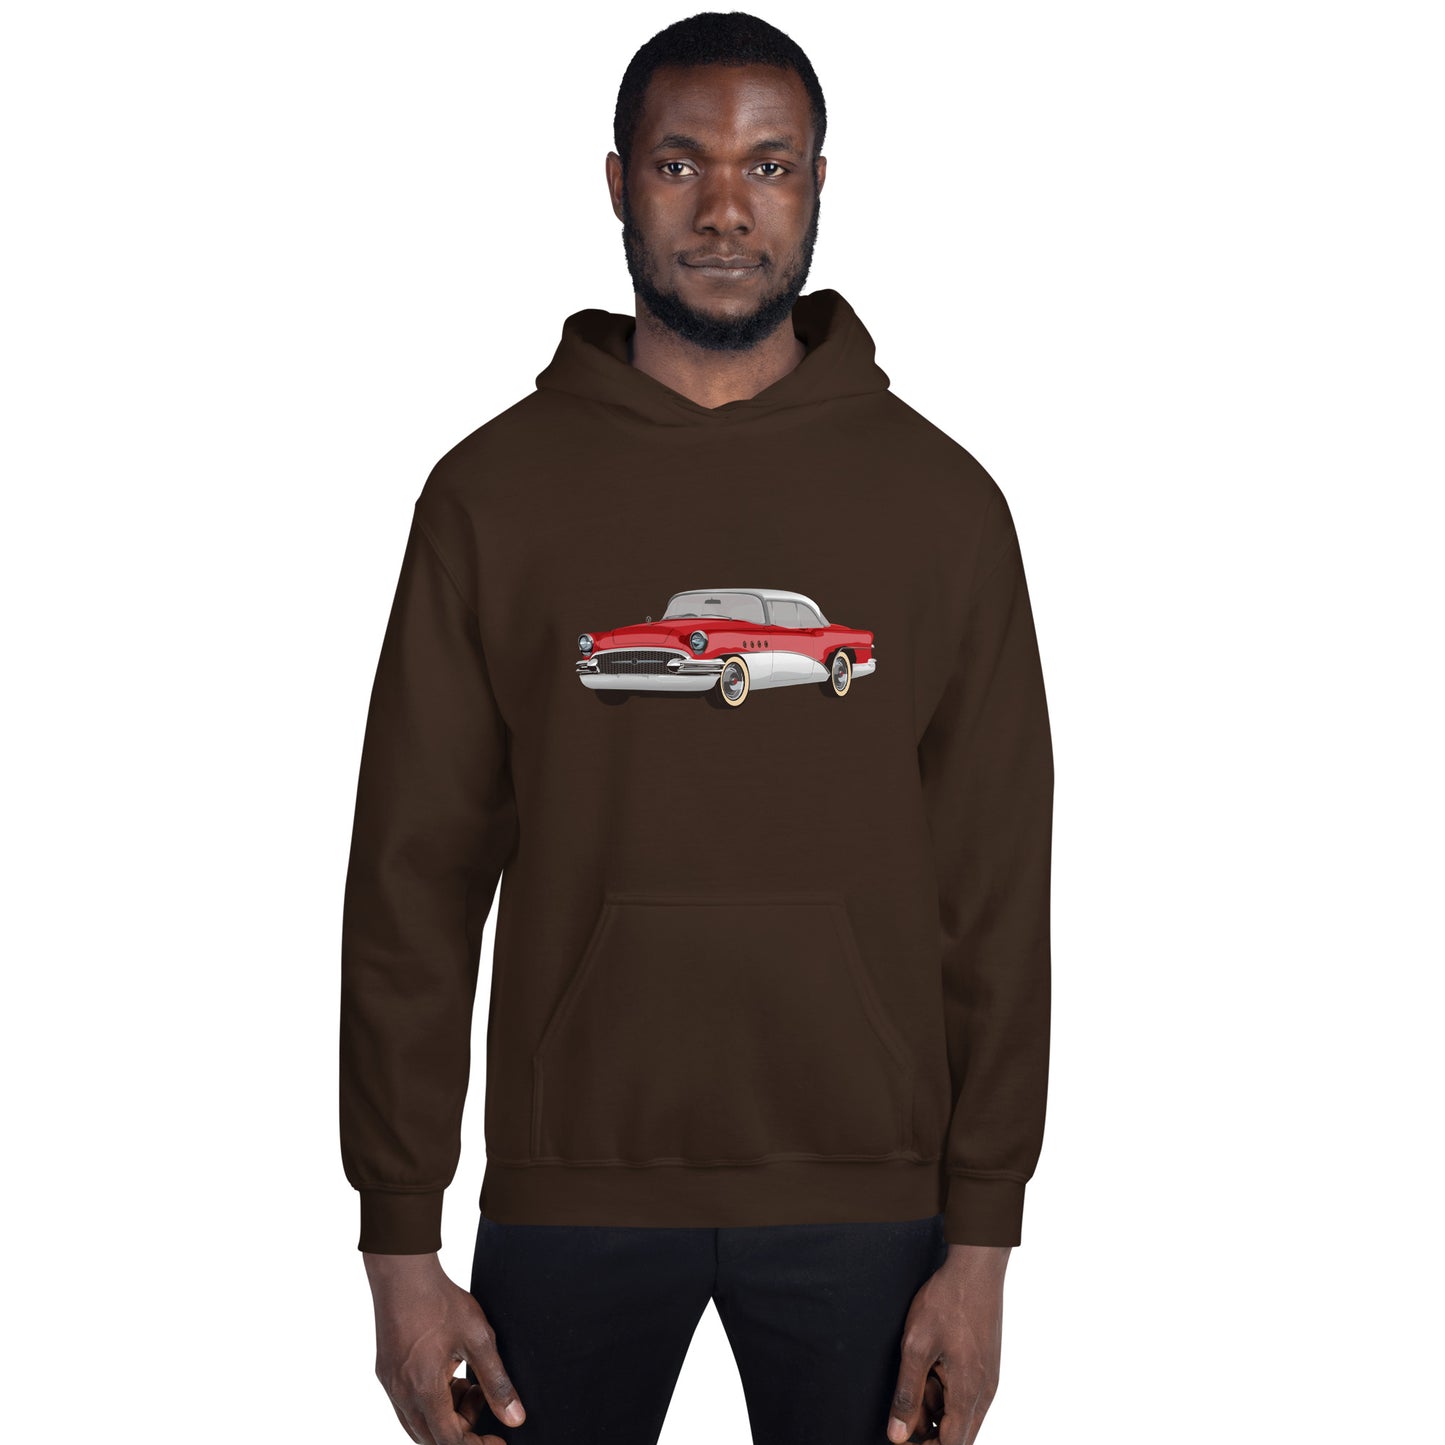 Man with dark chocolate hoodie with red chevrolet